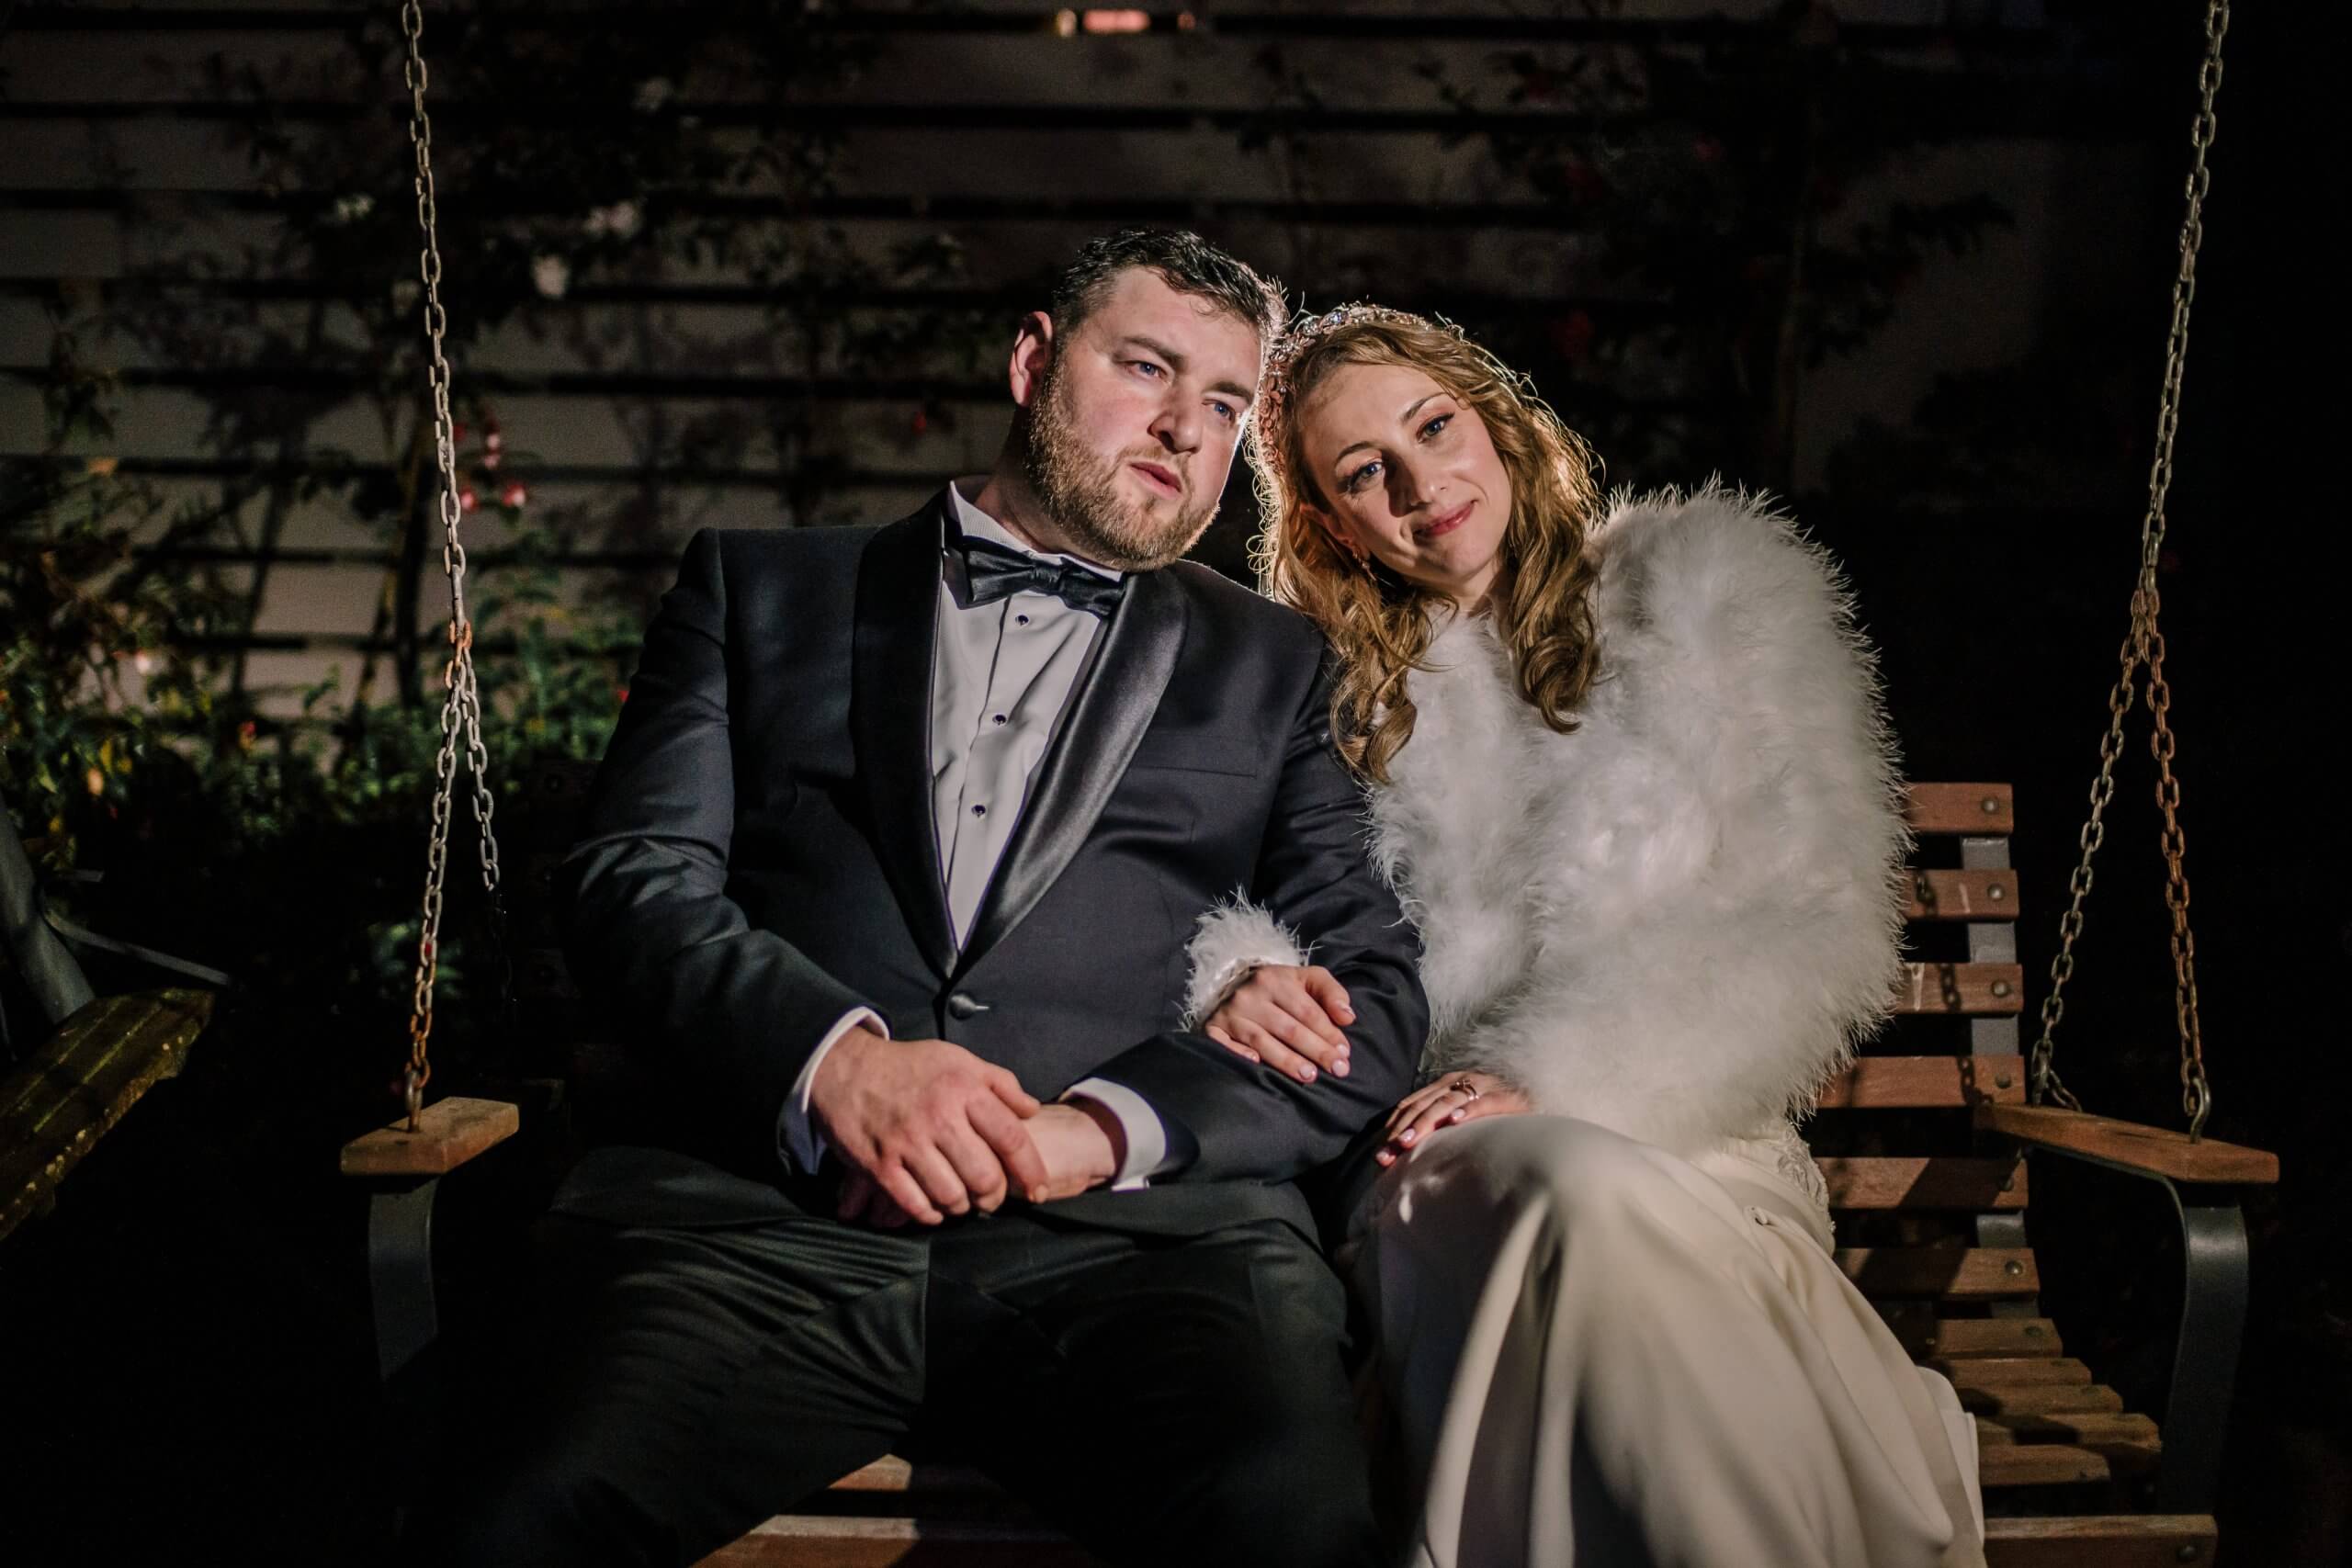 Nighttime photo of the bride and grooms who sits together on a wooden swing.